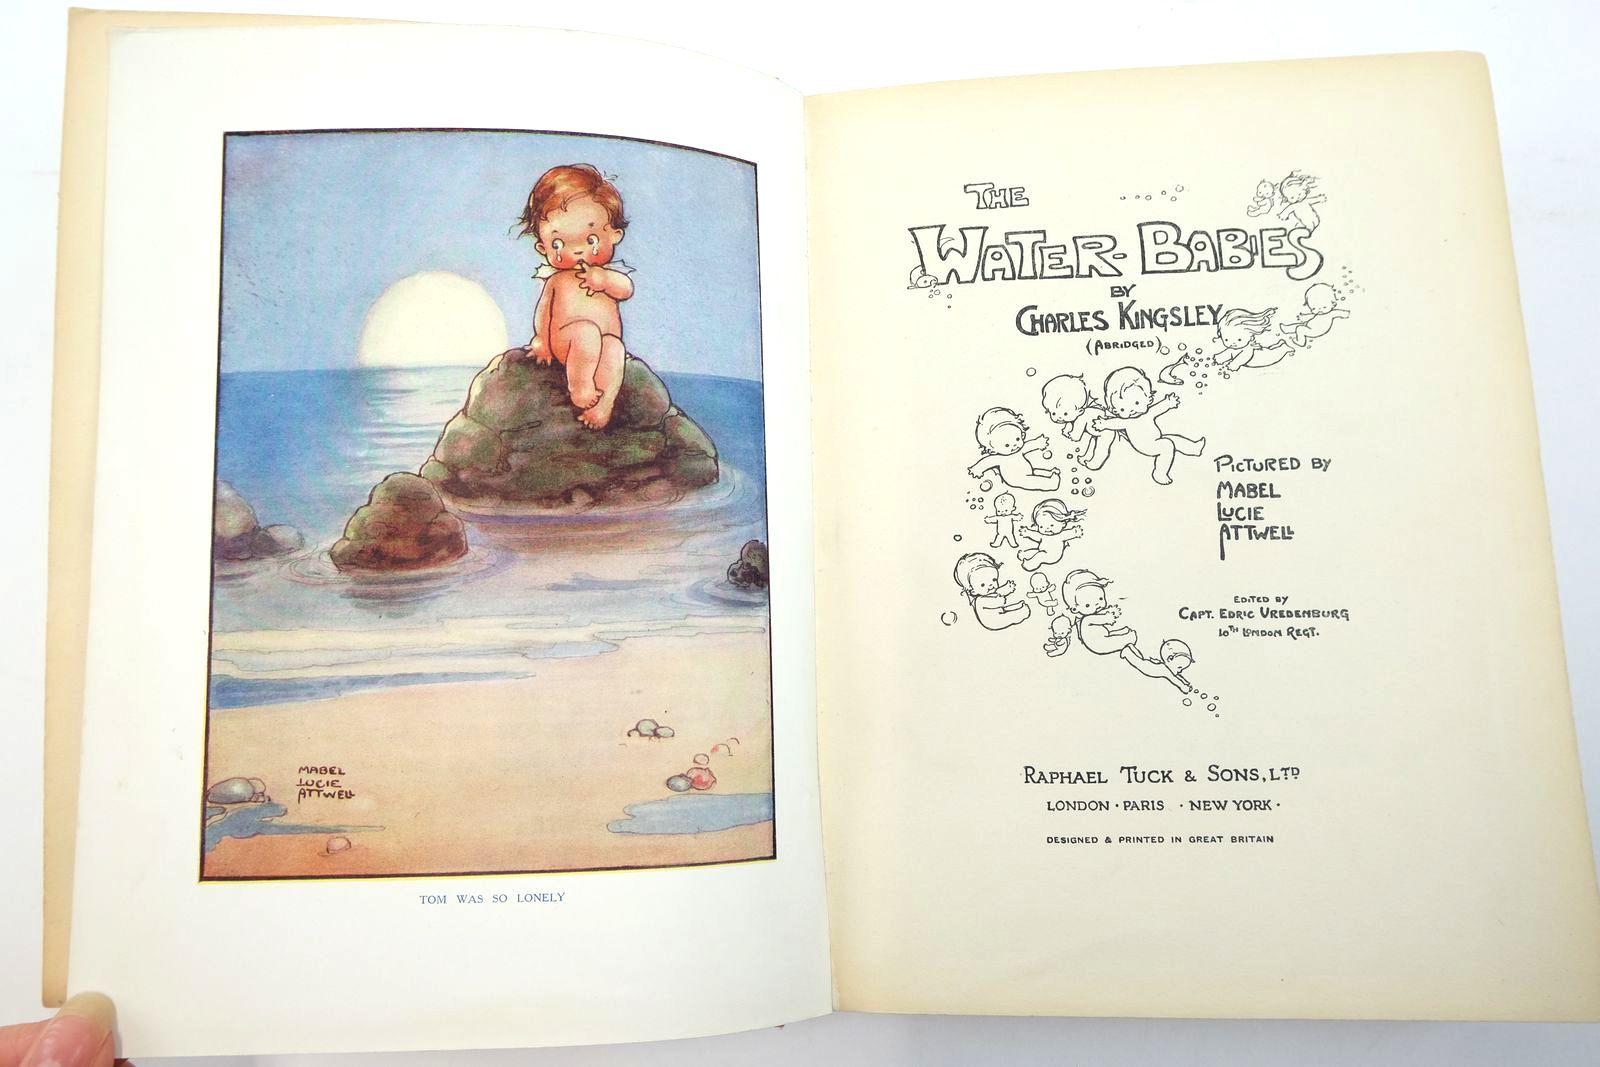 Photo of THE WATER BABIES written by Kingsley, Charles illustrated by Attwell, Mabel Lucie published by Raphael Tuck & Sons Ltd. (STOCK CODE: 2140948)  for sale by Stella & Rose's Books